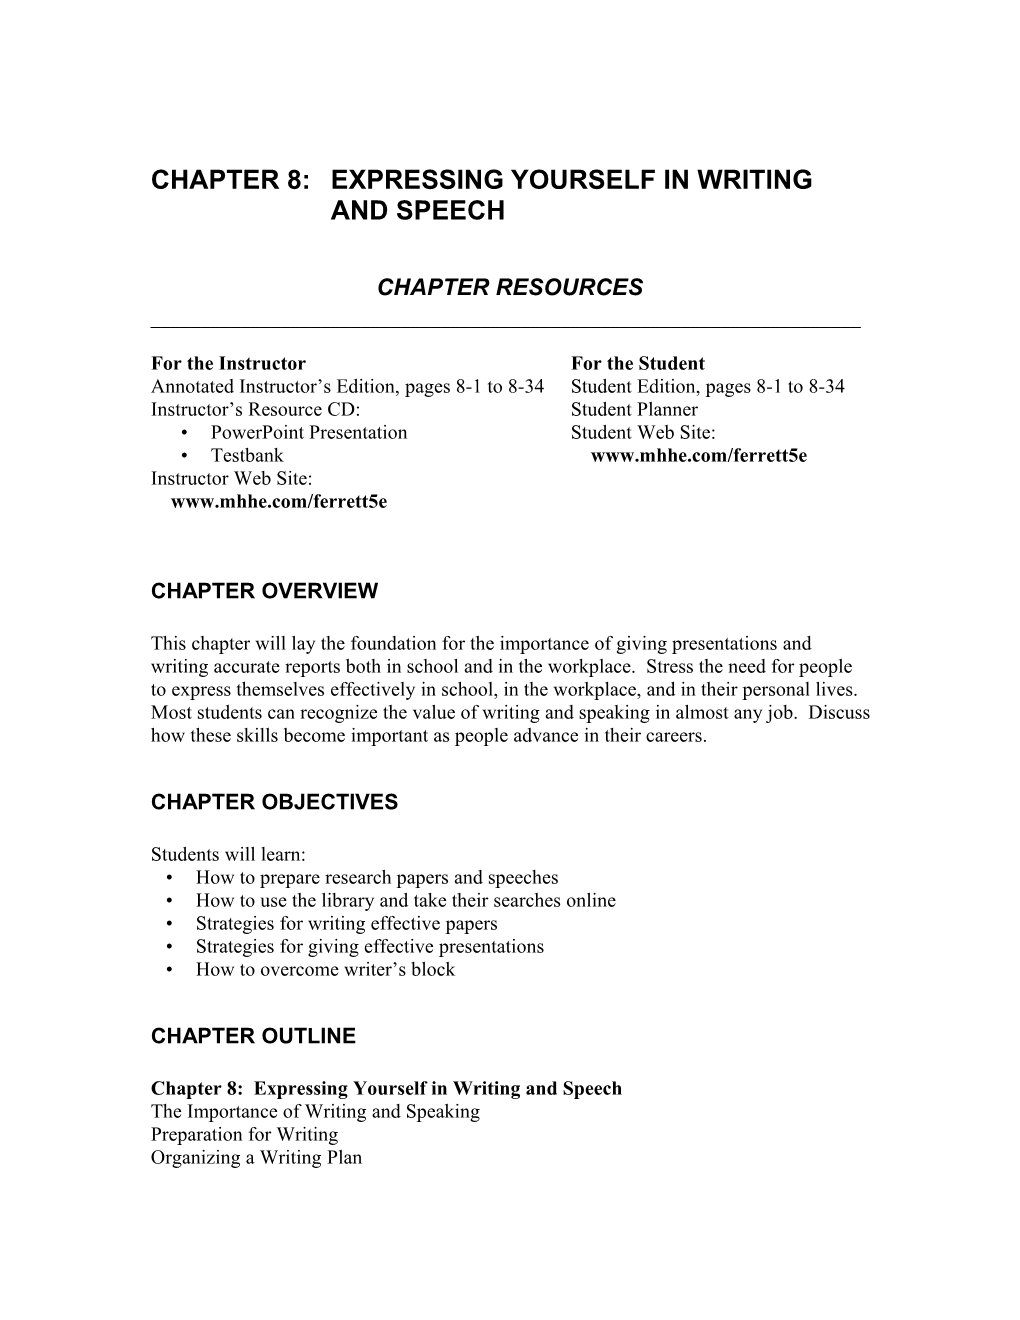 Part 2: Chapter Notes and Answers